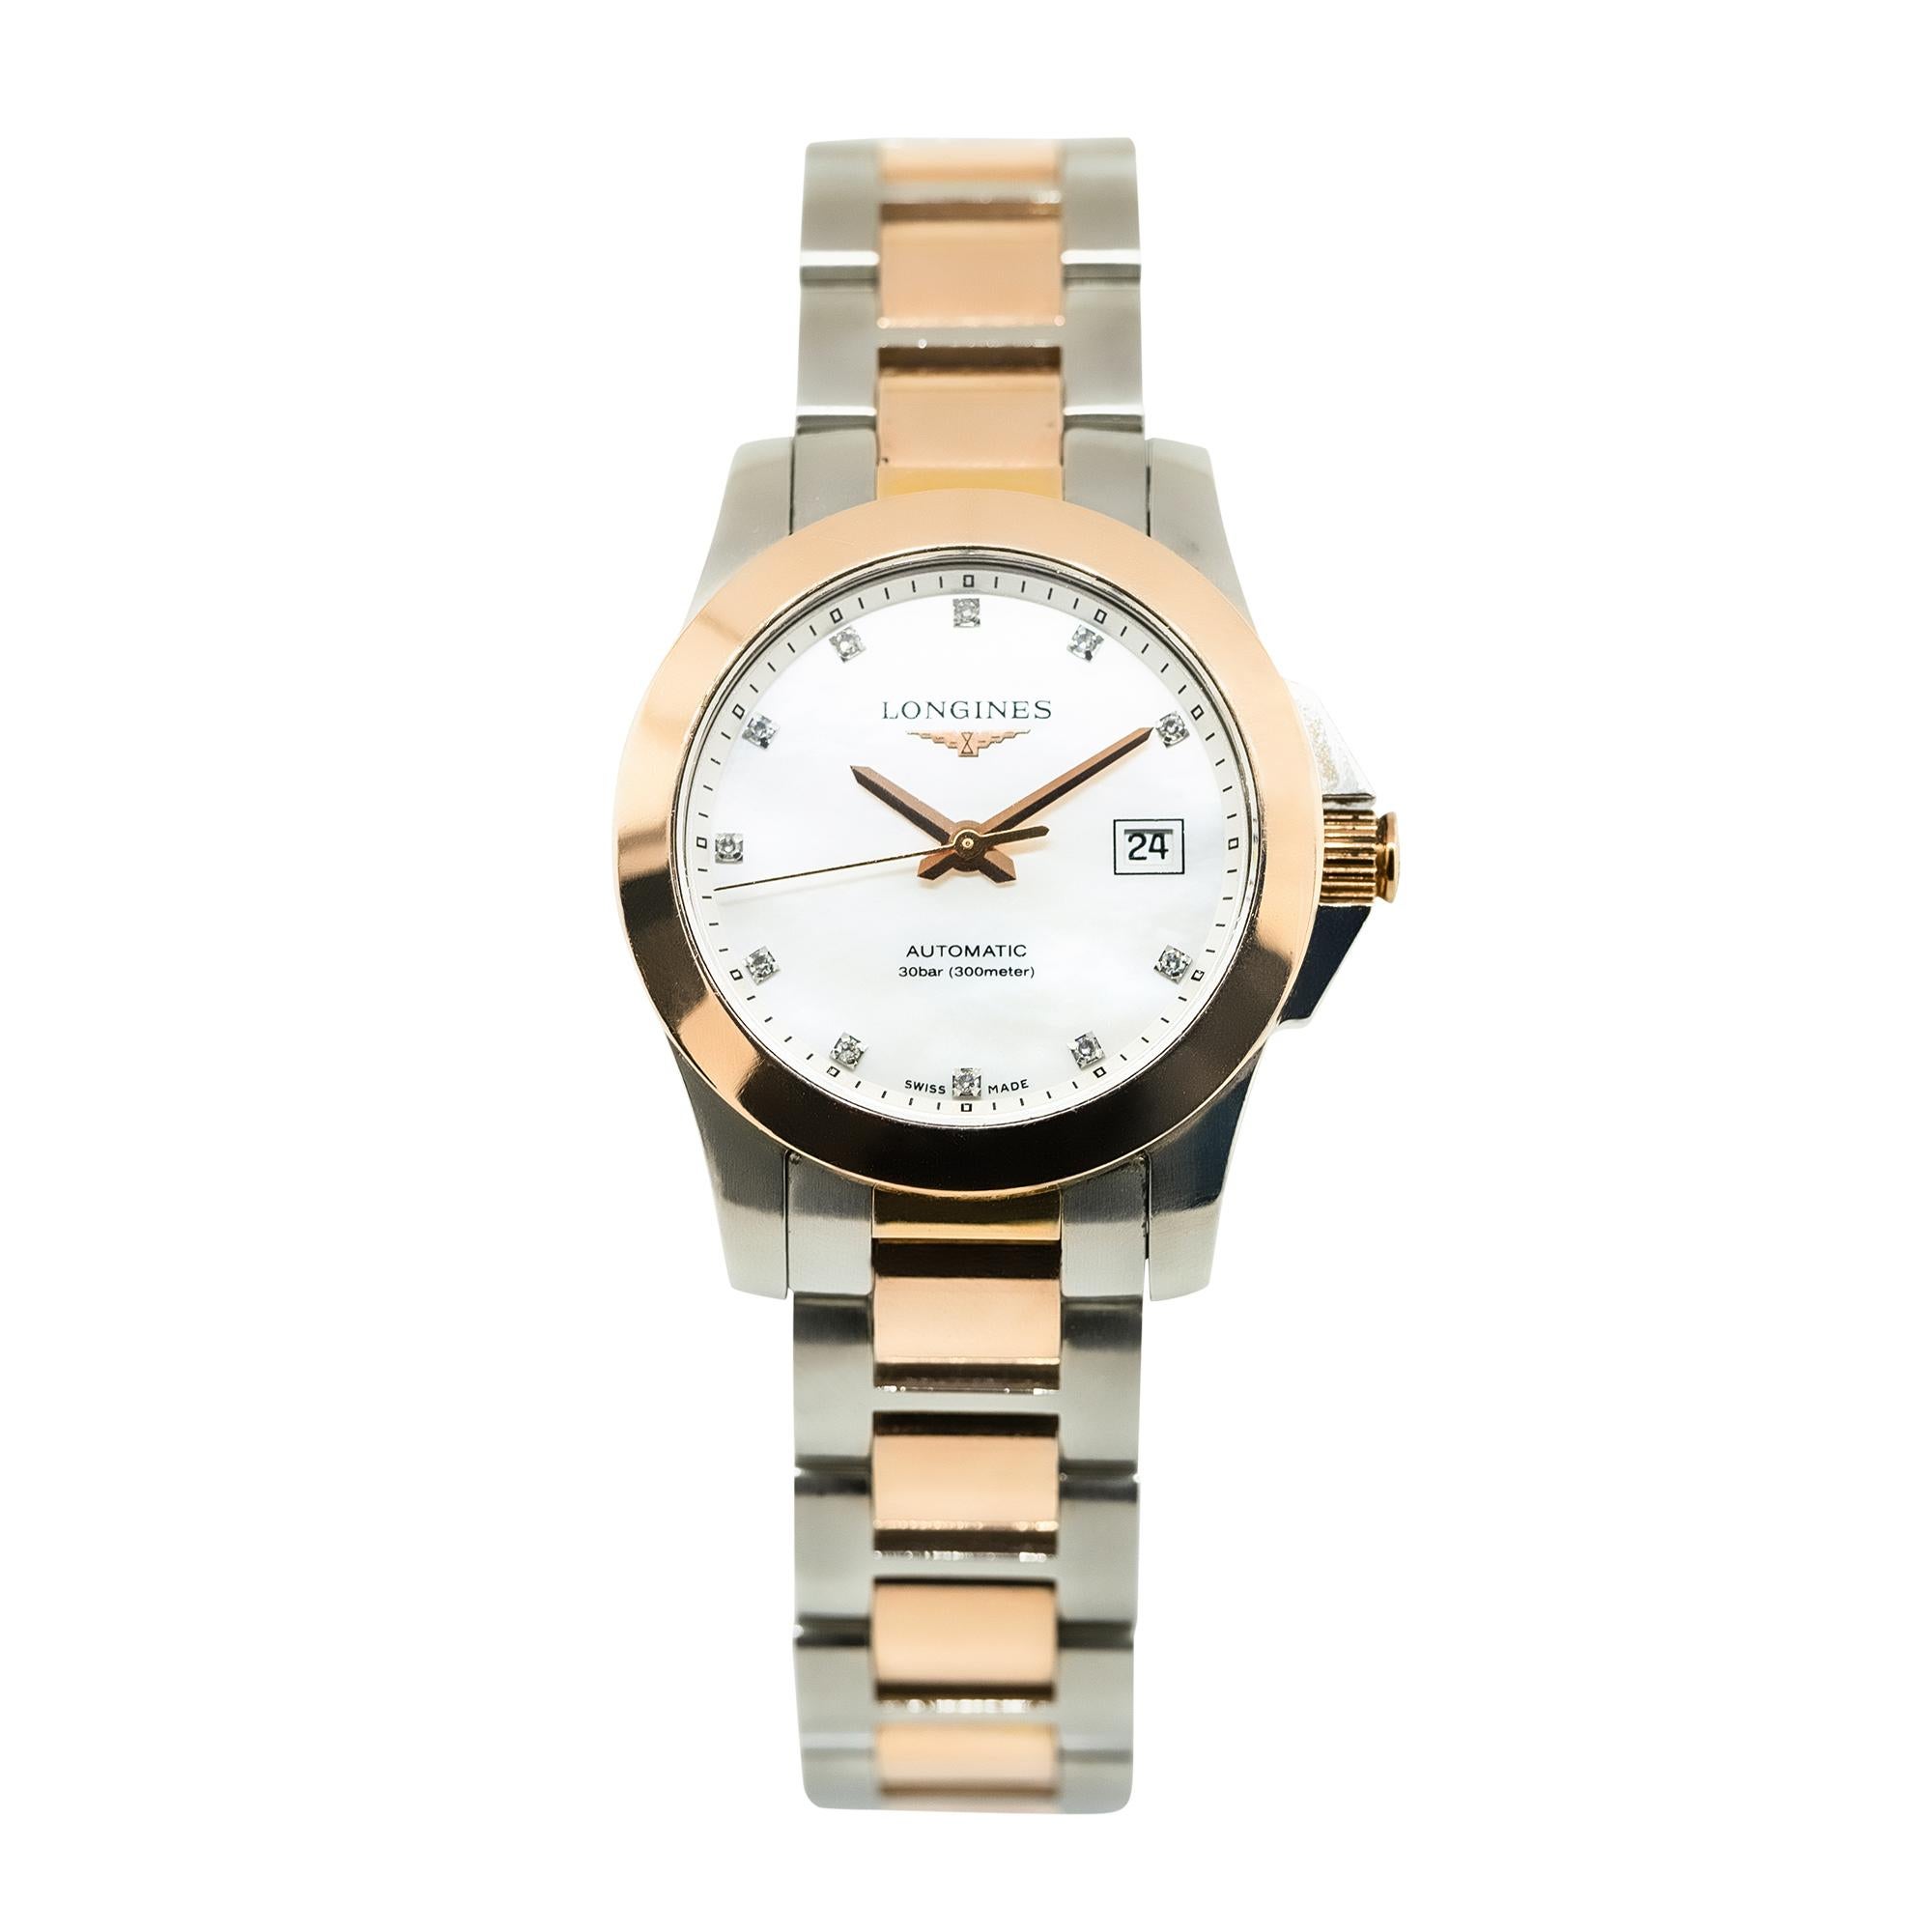 Brand: Longines
Reference: L3.276.5
Case Material: 18k Rose Gold and Stainless Steel Case
Case Diameter: 29.5 mm
Dial: Mother of Pearl with Diamond Accent Dial. Date can be found at 3 o'clock.
Bezel: 18k Rose Gold Bezel
Bracelet: 18k Rose Gold and